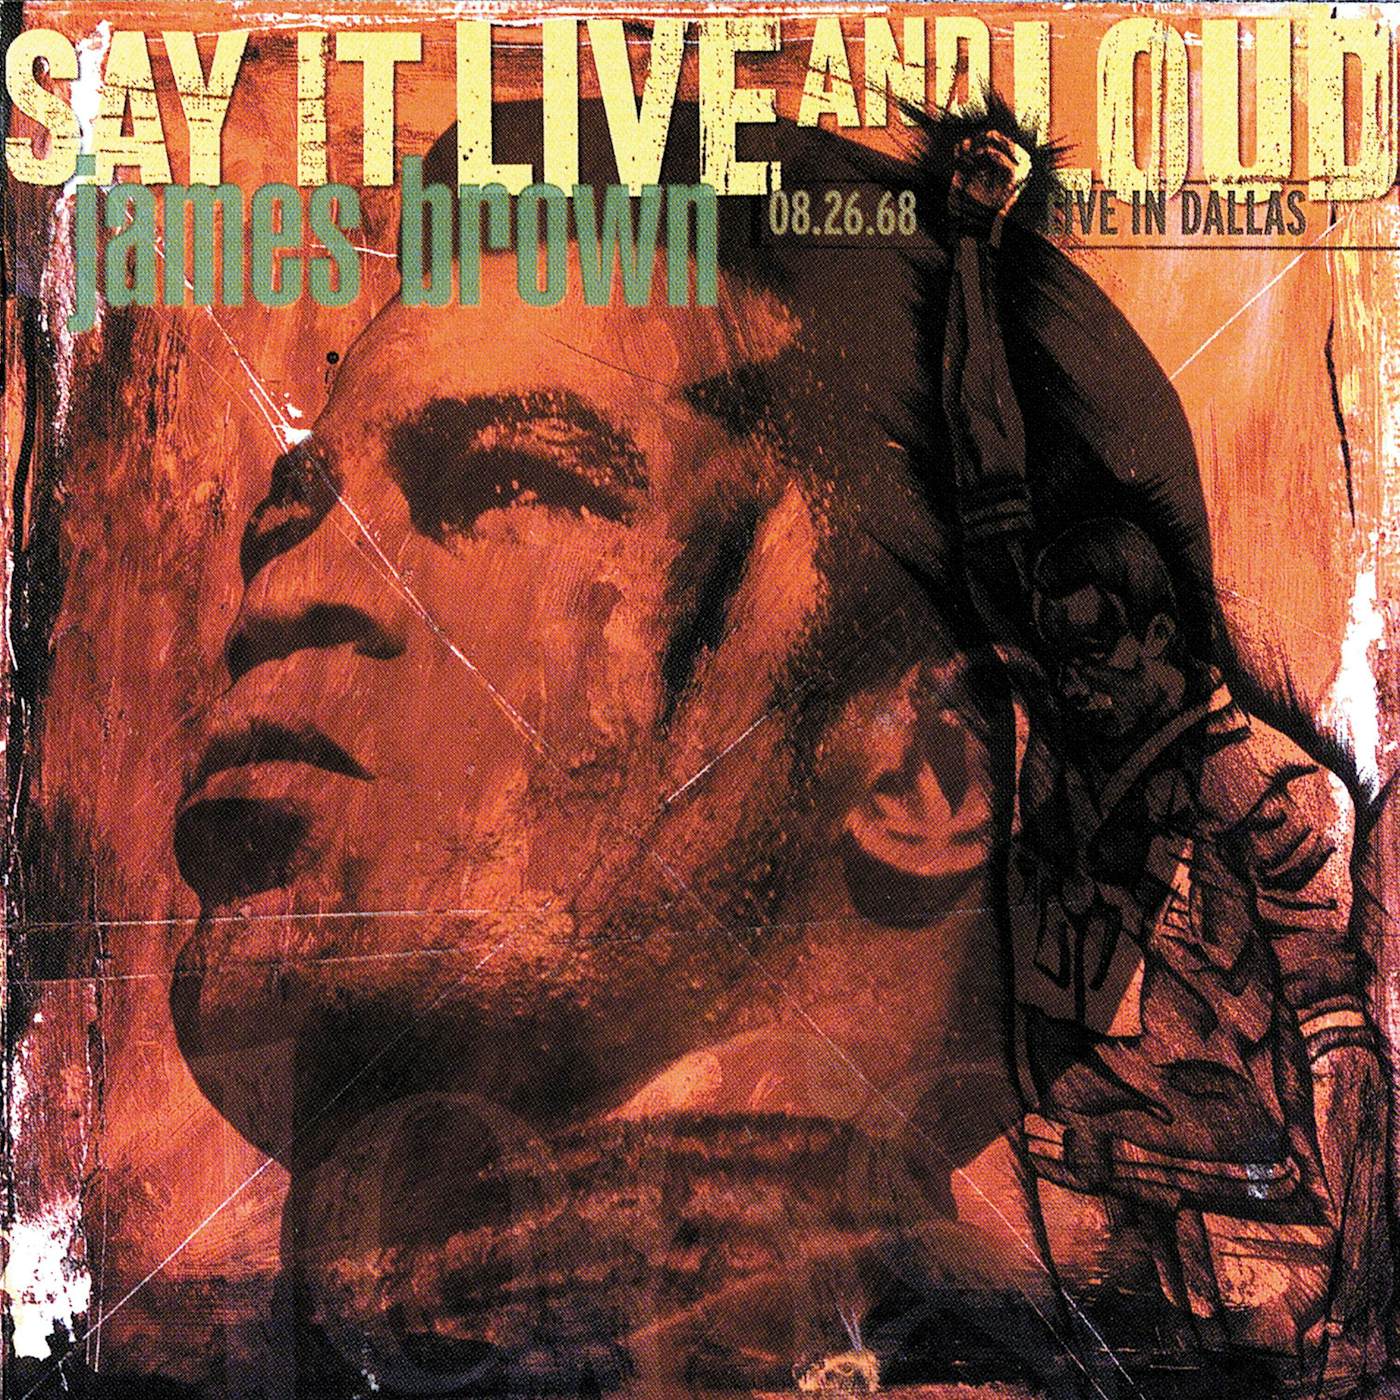 James Brown SAY IT LIVE AND LOUD: LIVE IN DALLAS 8.26.68 (2 LP)(EXPANDED EDITION) Vinyl Record